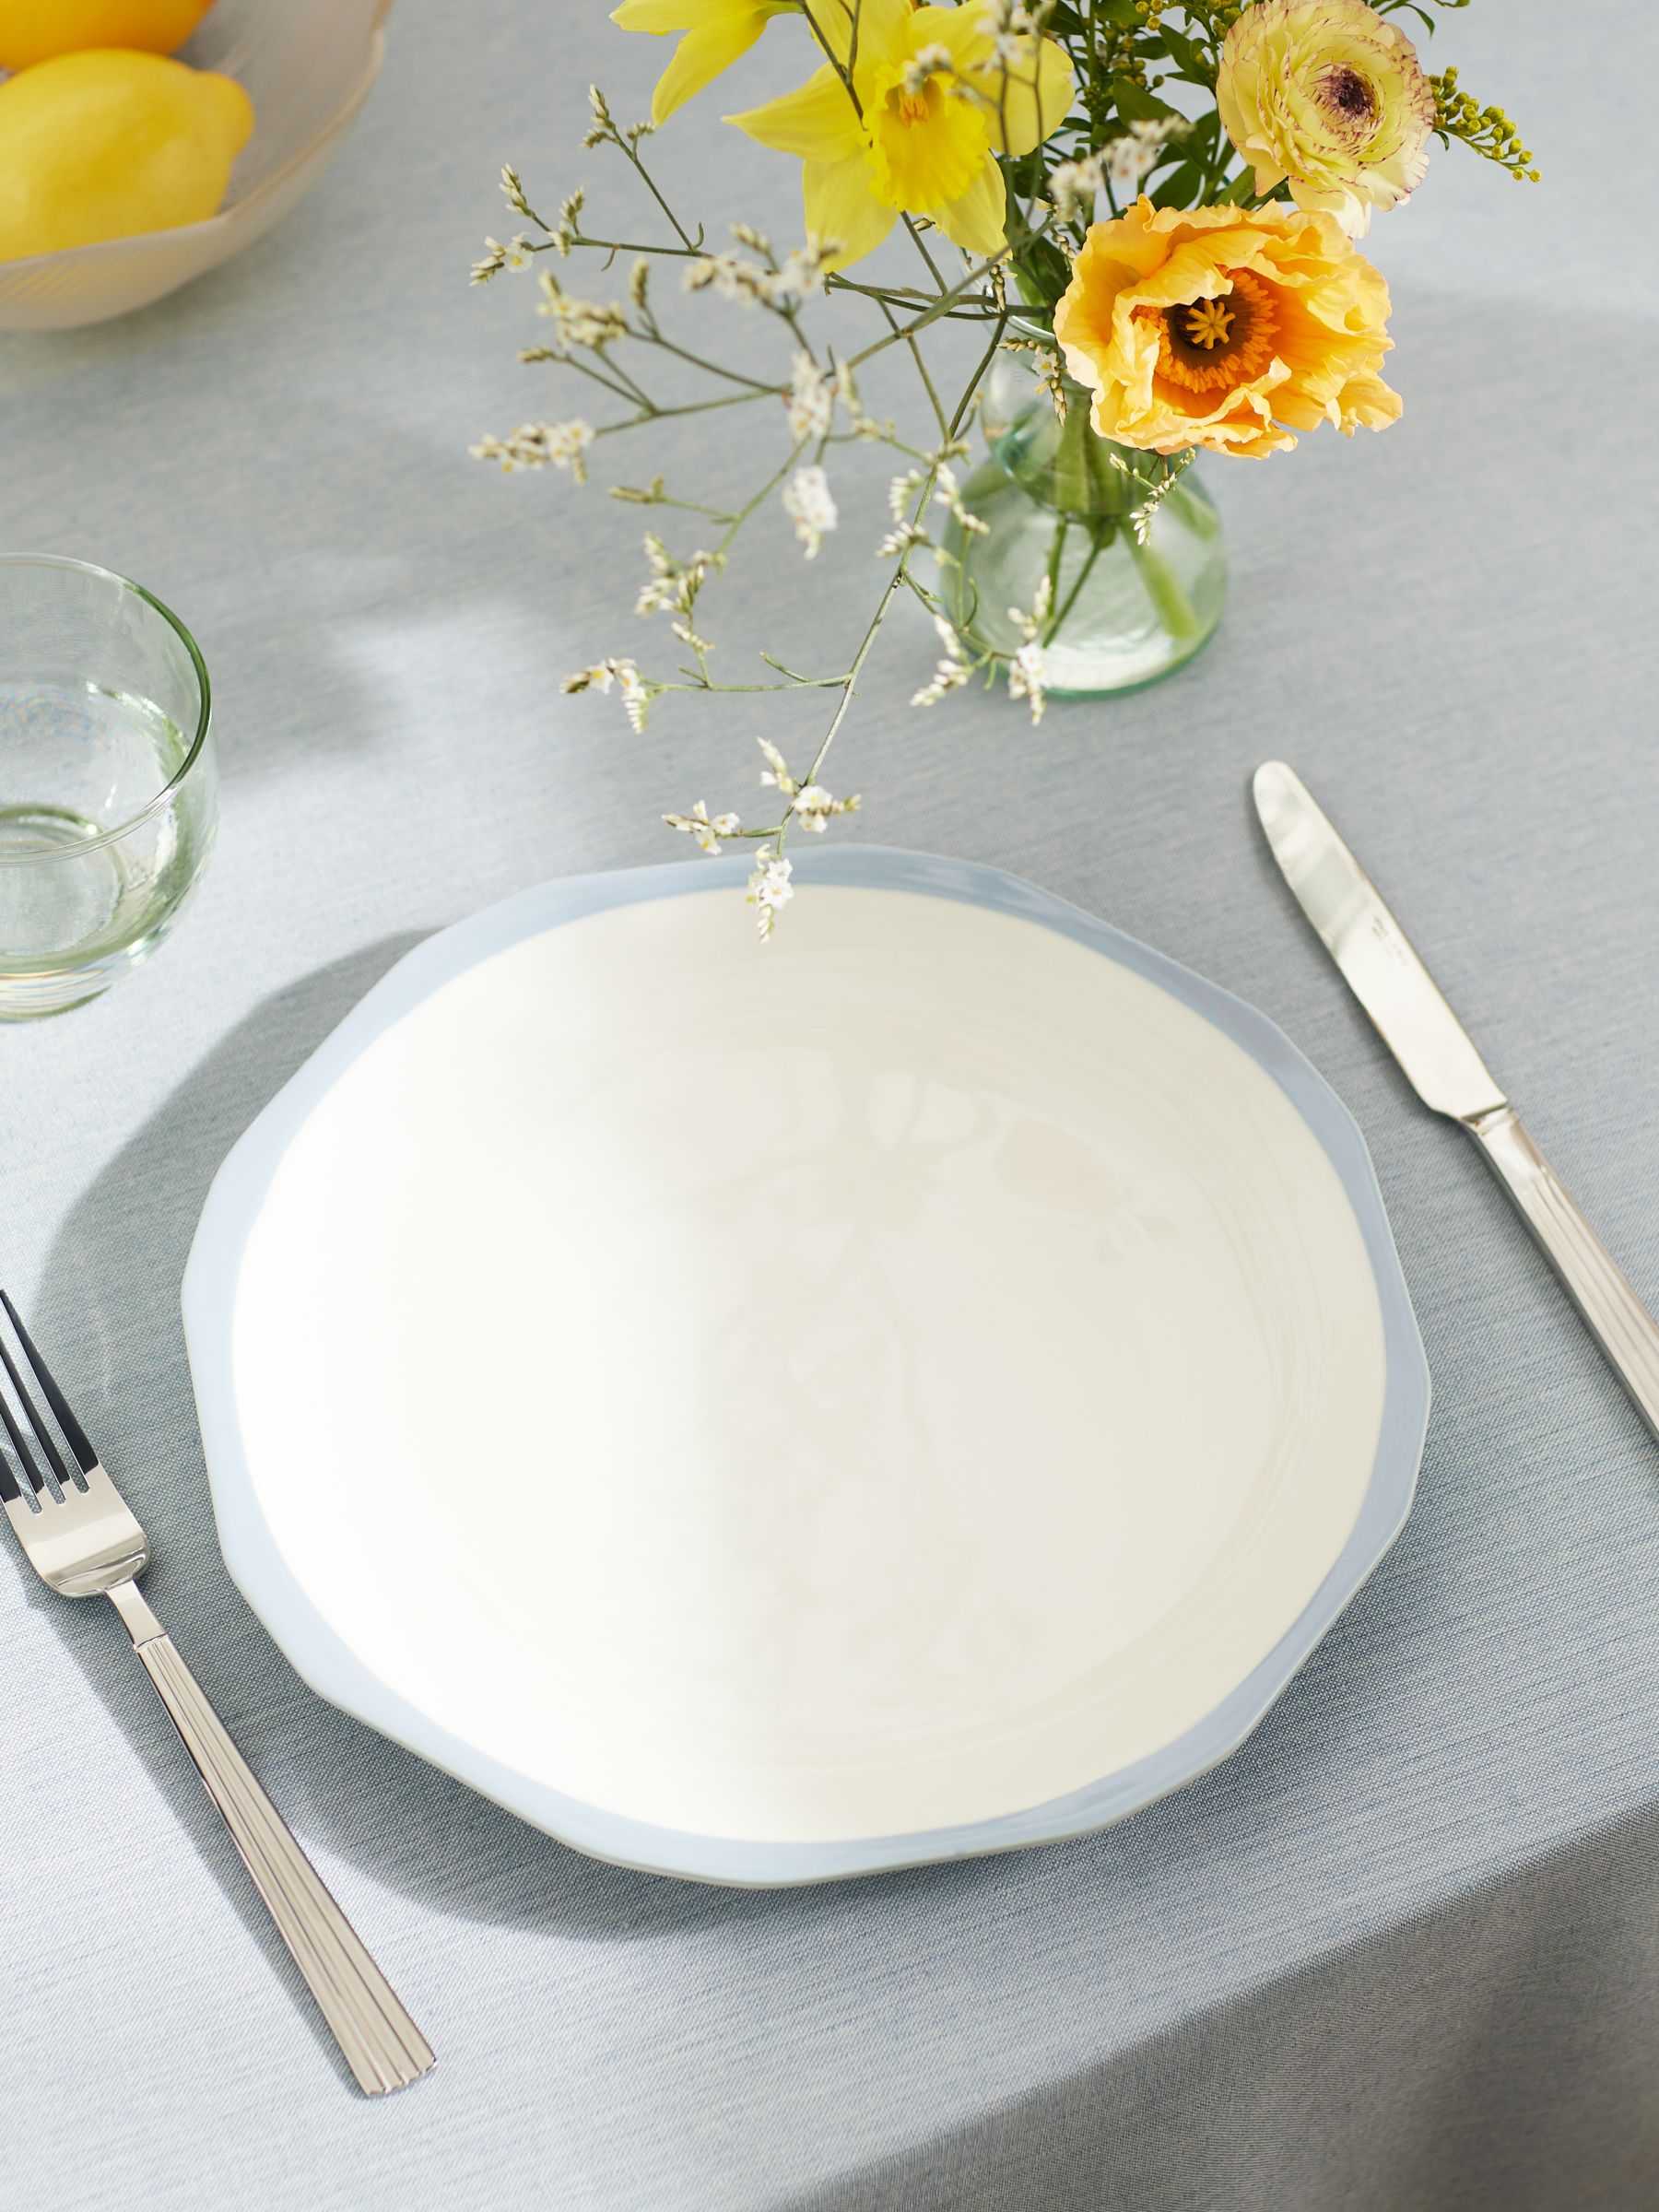 Aster Shaped Fine China Dinner Plate, 28cm, White/Blue £8.00